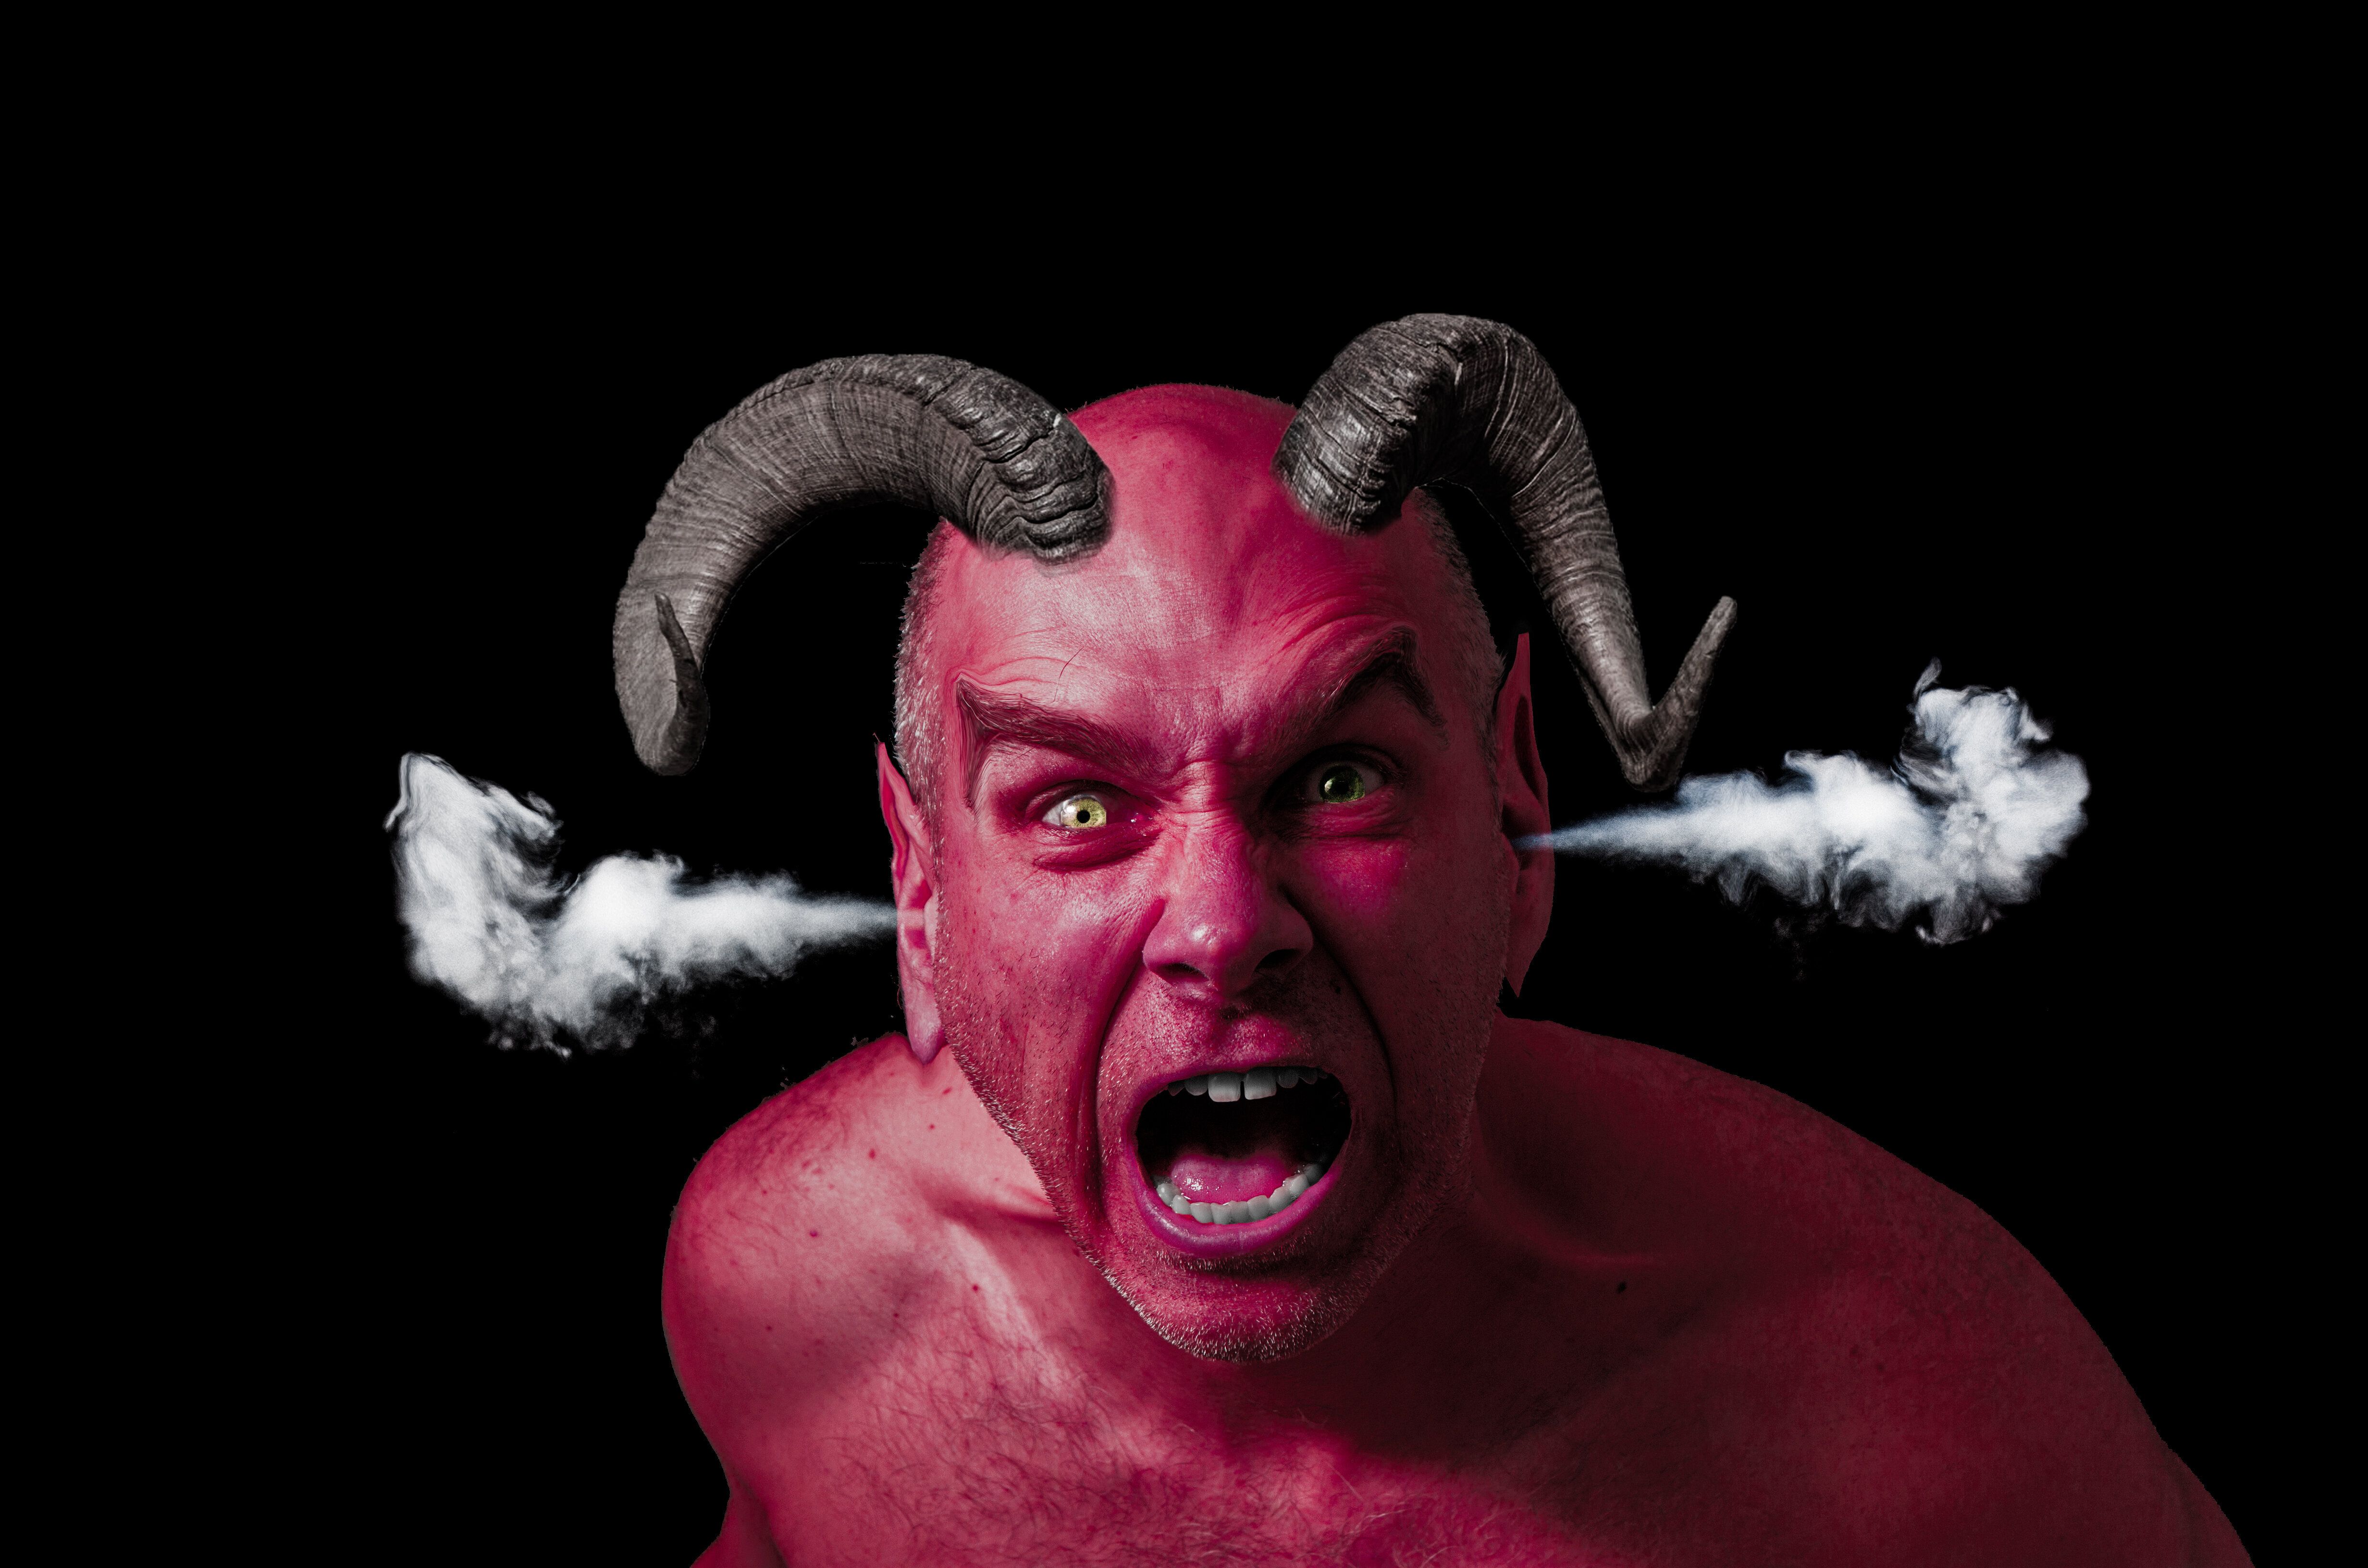 Christian Lawmakers Group Blames Satan After Twitter Poll Goes Badly Awry